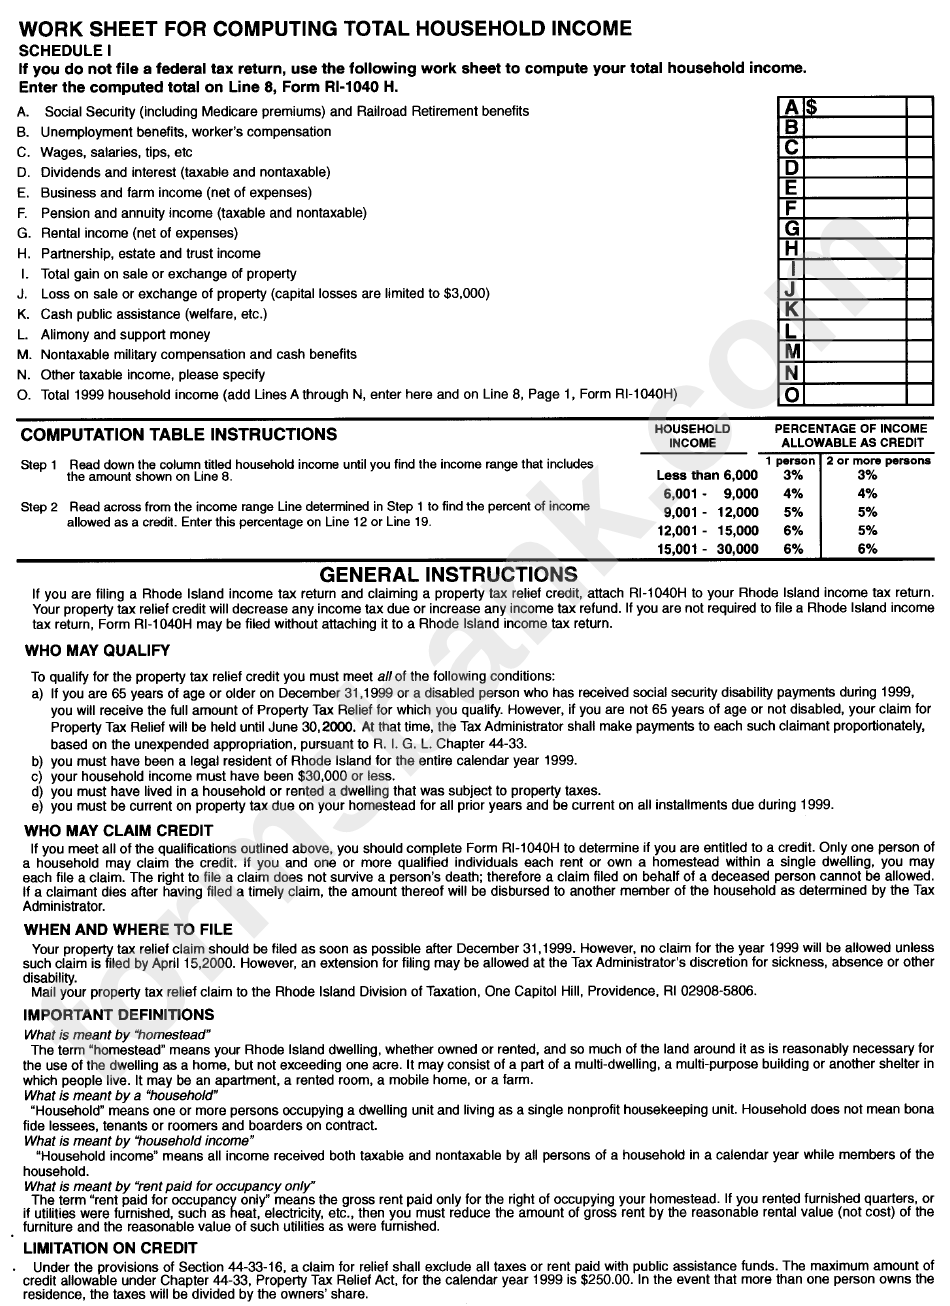 Work Sheet For Computing Total Household Income